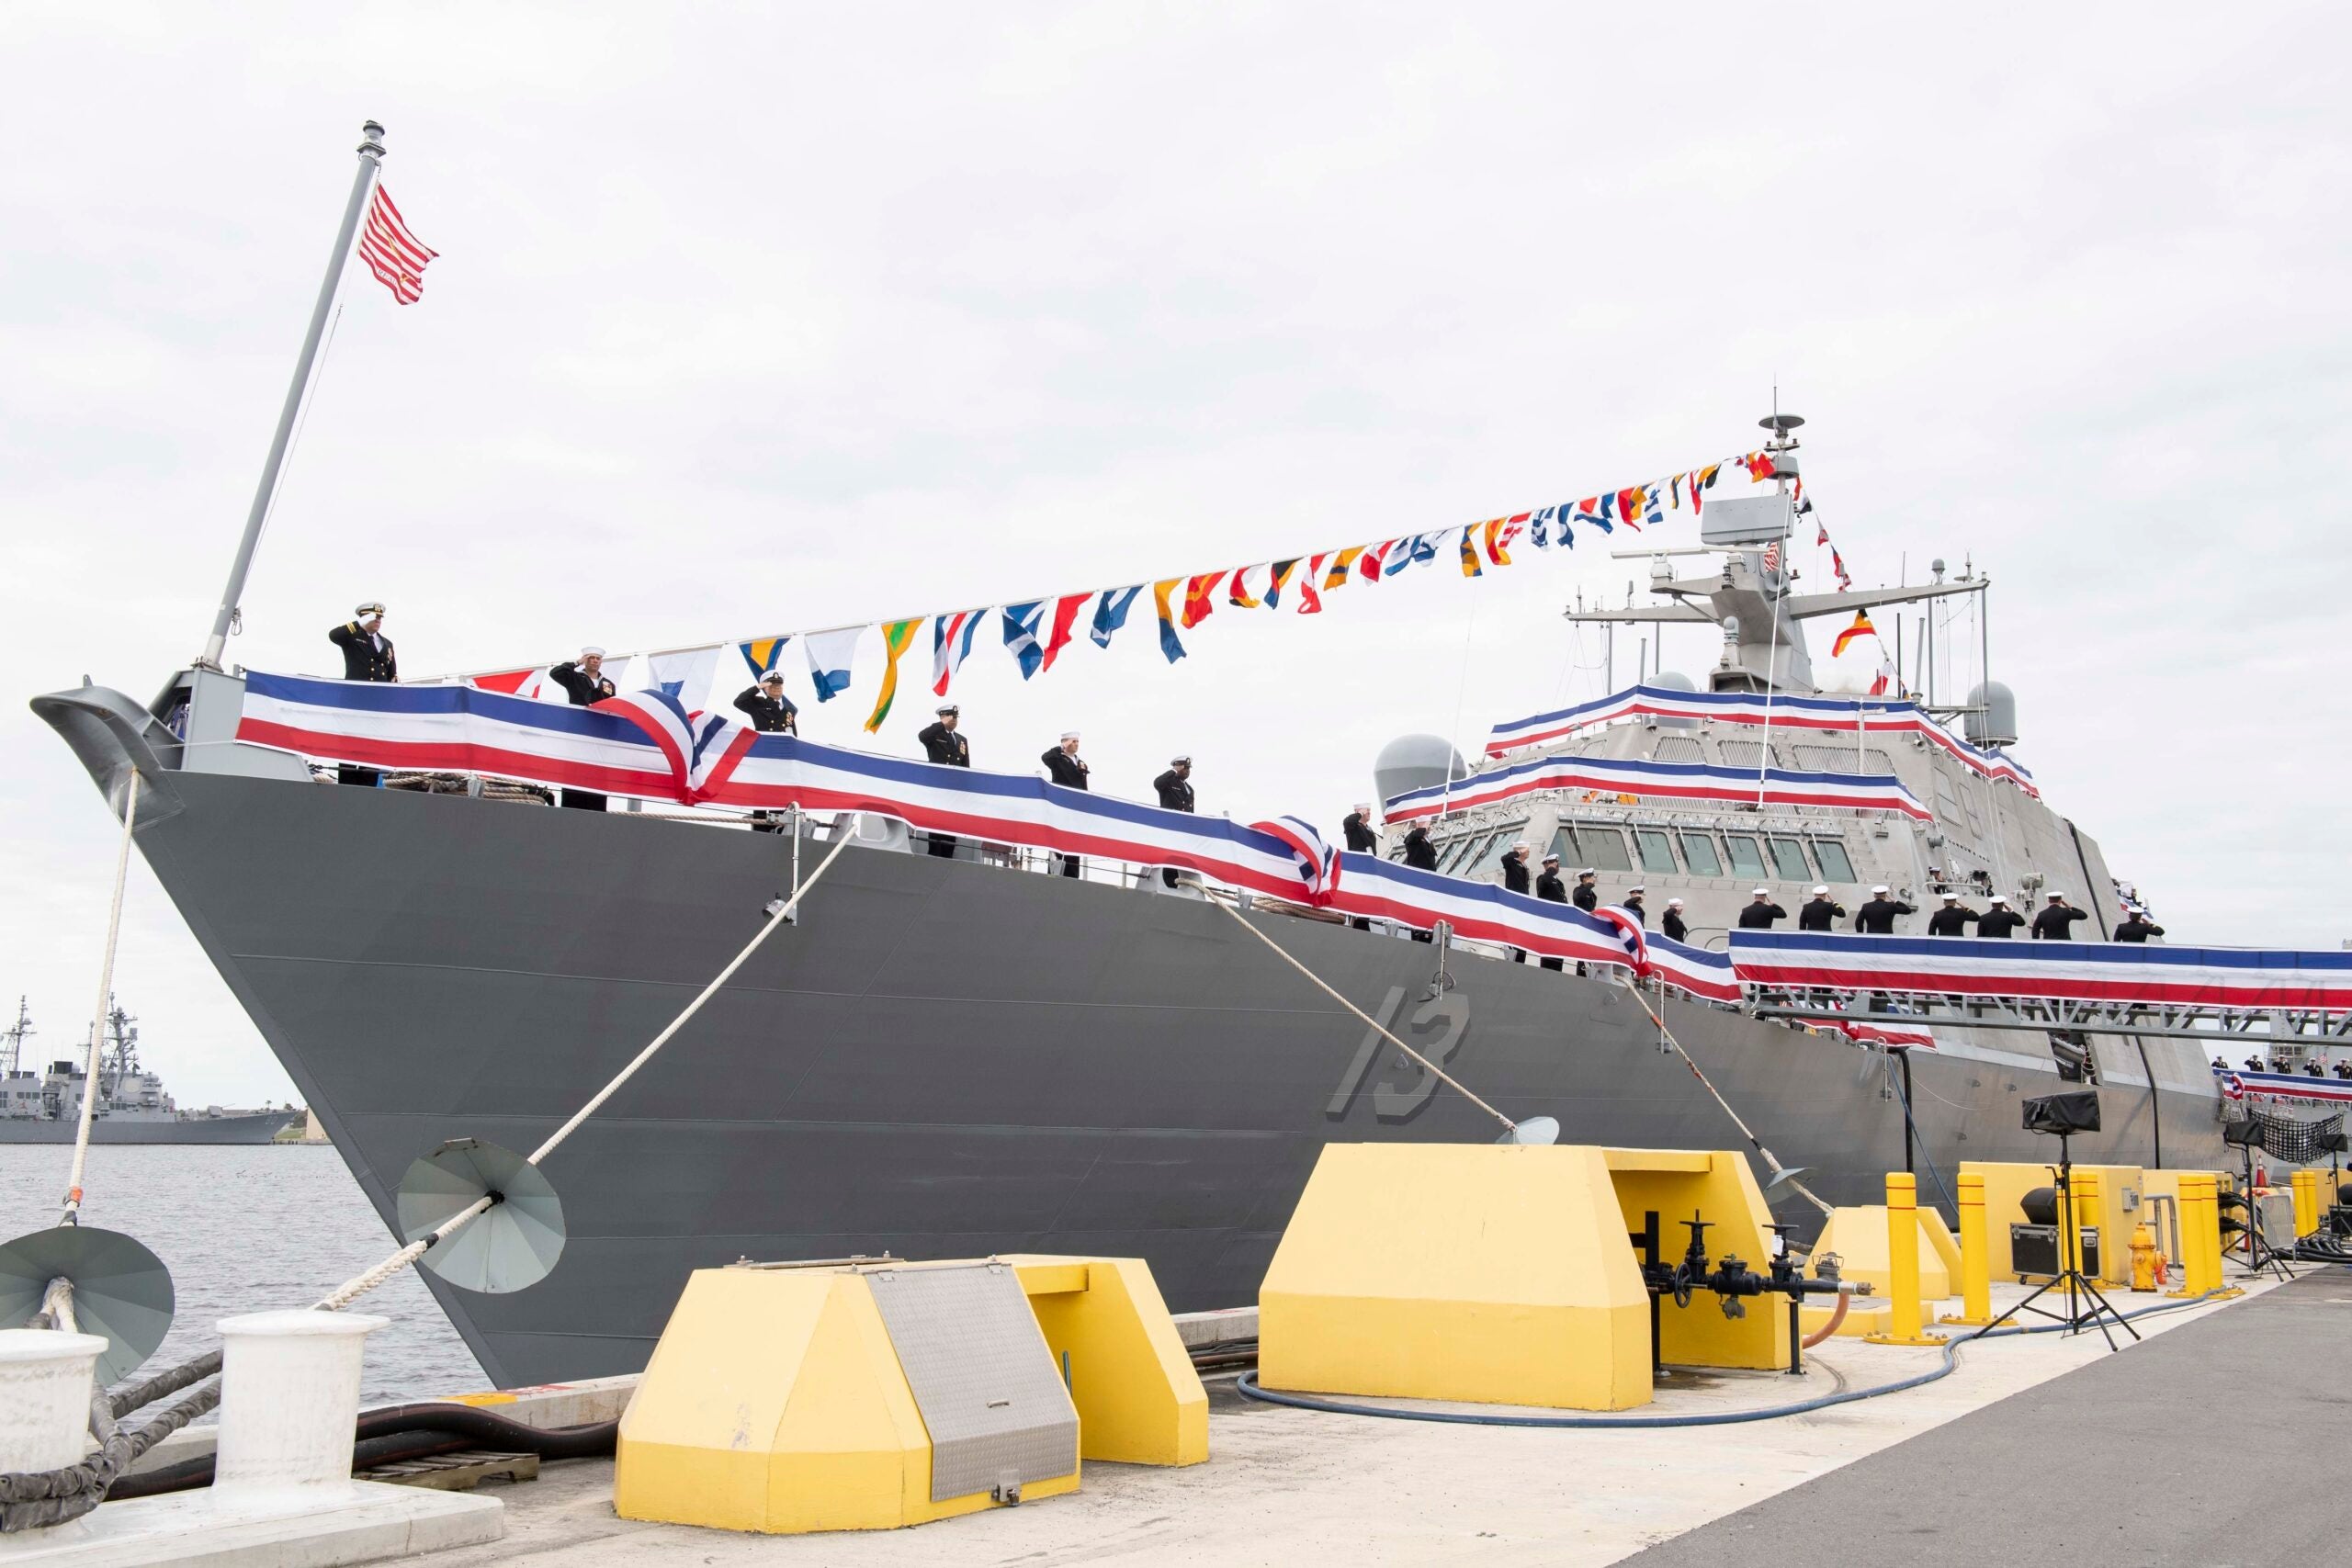 MAYPORT, Fla. (Jan. 12, 2019) The crew of the Navy's newest littoral combat ship USS Wichita (LCS 13), bring the ship to life during its commissioning ceremony, at Naval Station Mayport, Jan. 12. LCS 13 is the fourteenth littoral combat ship to enter the fleet and the seventh of the Freedom variant. It is the third Navy combat ship named after Wichita, the largest city in Kansas.

(U.S. Navy photo by Mass Communication Specialist 3rd Class Alana Langdon/Released)